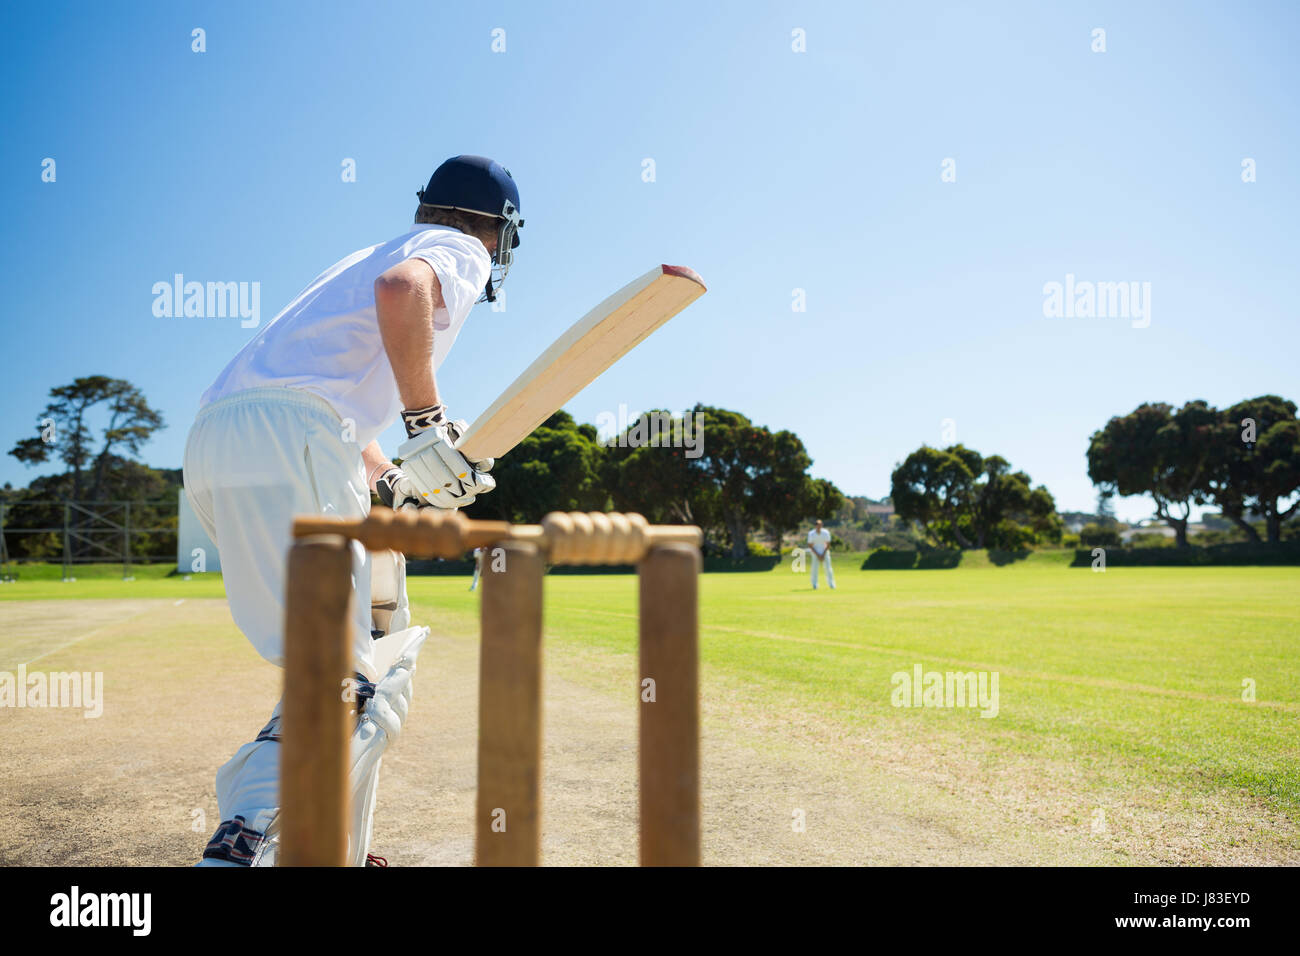 Side view of cricket player batting while playing on field against clear sky Stock Photo